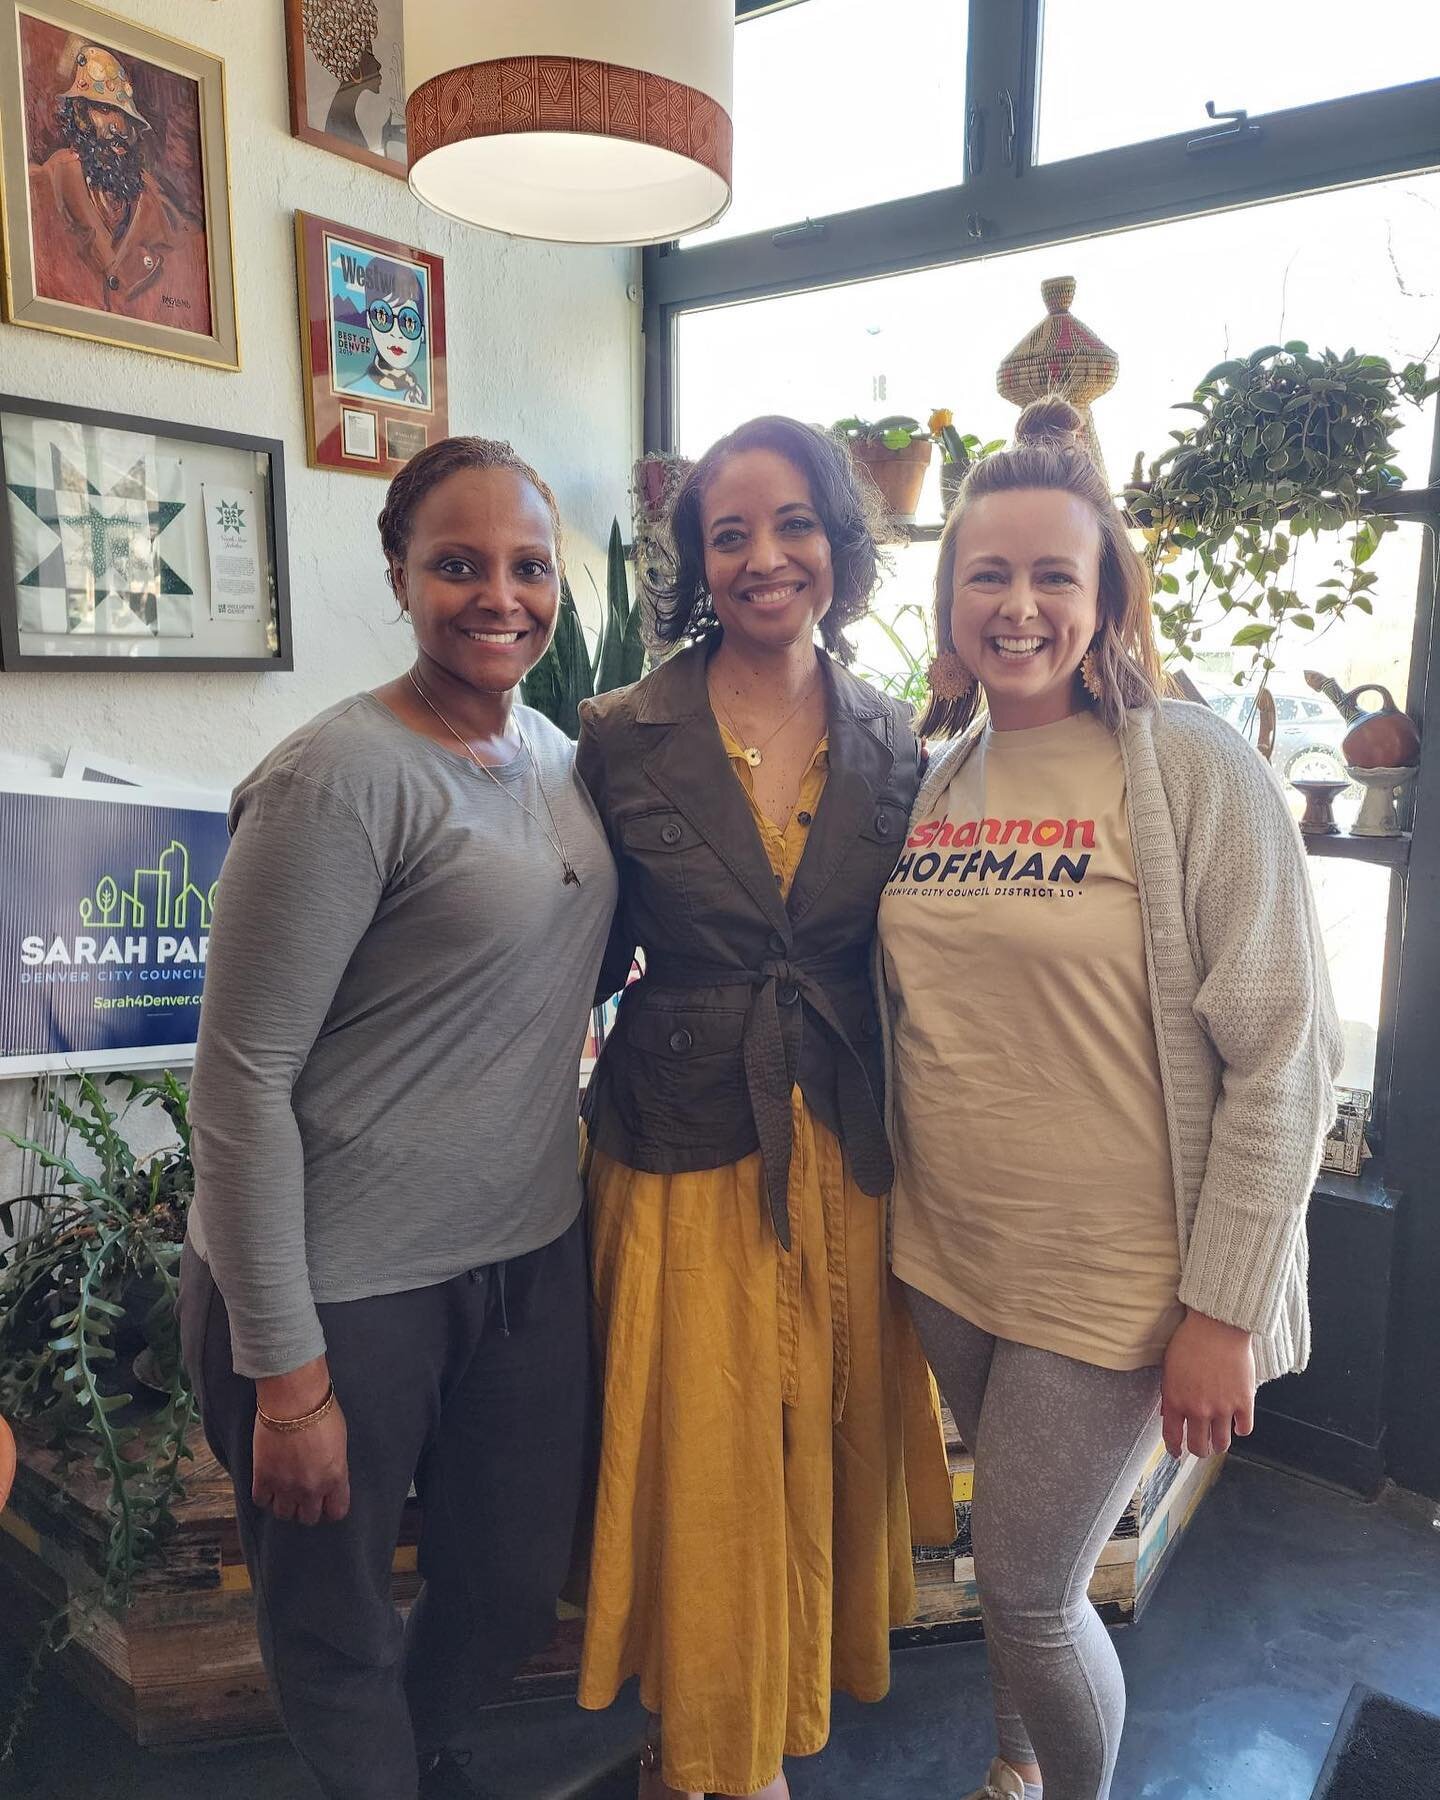 Today, I want to take you with me as I do a full day of campaigning ahead of tomorrow's election! First stop of the day, the necessary @whittiercafe to get some caffeine and breakfast! I also met up with @shannonlovesd10 for solidarity in these final